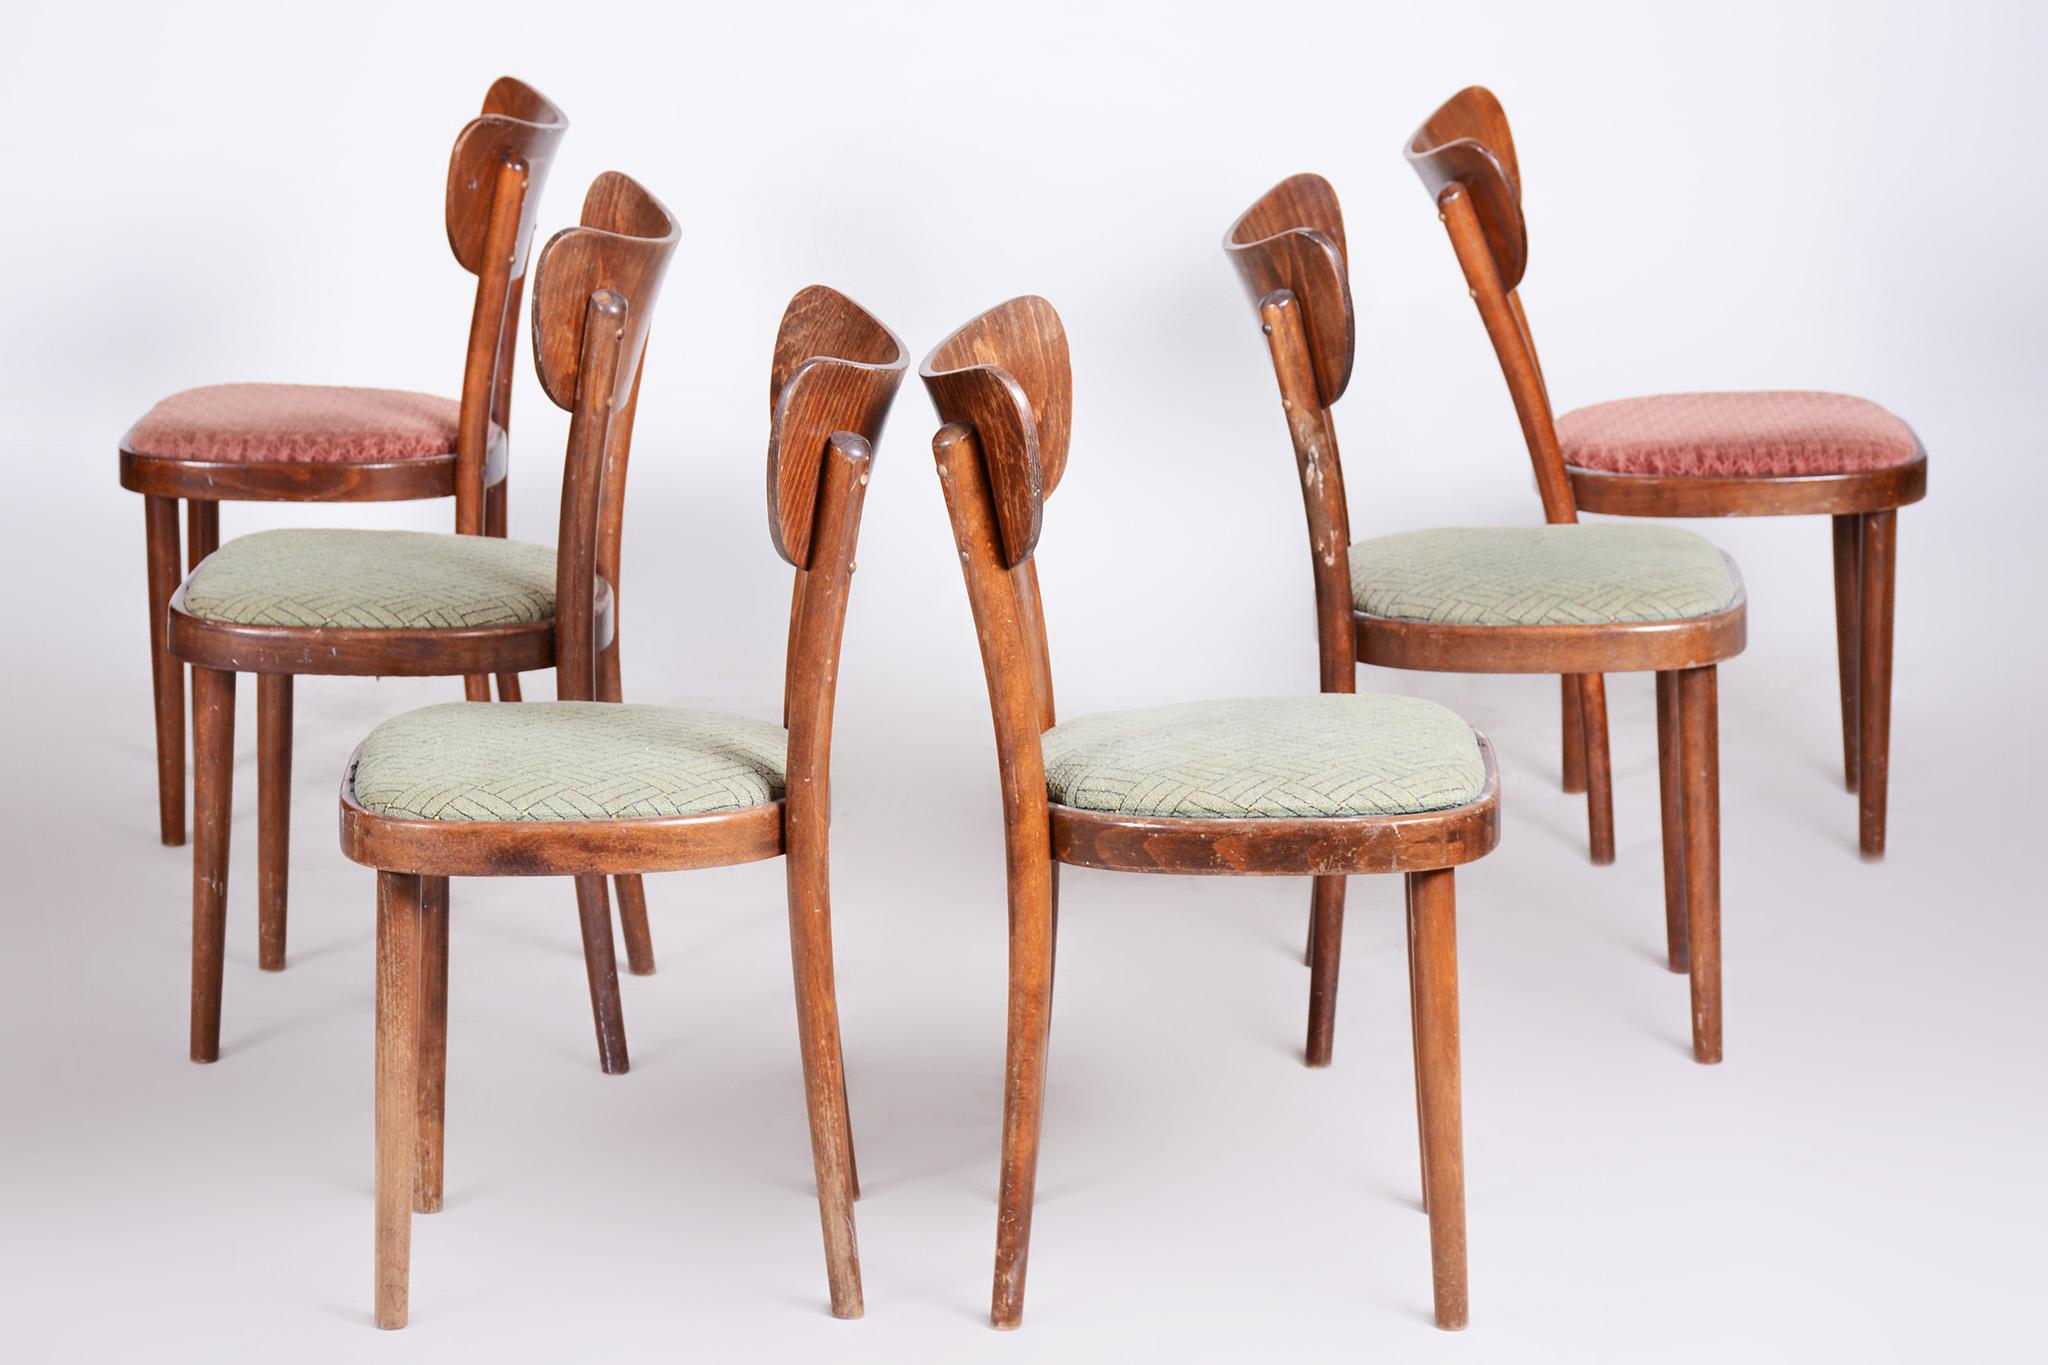 Mid-20th Century Set of 6 Dining Chairs Made by TON - 1940s, Czechia For Sale